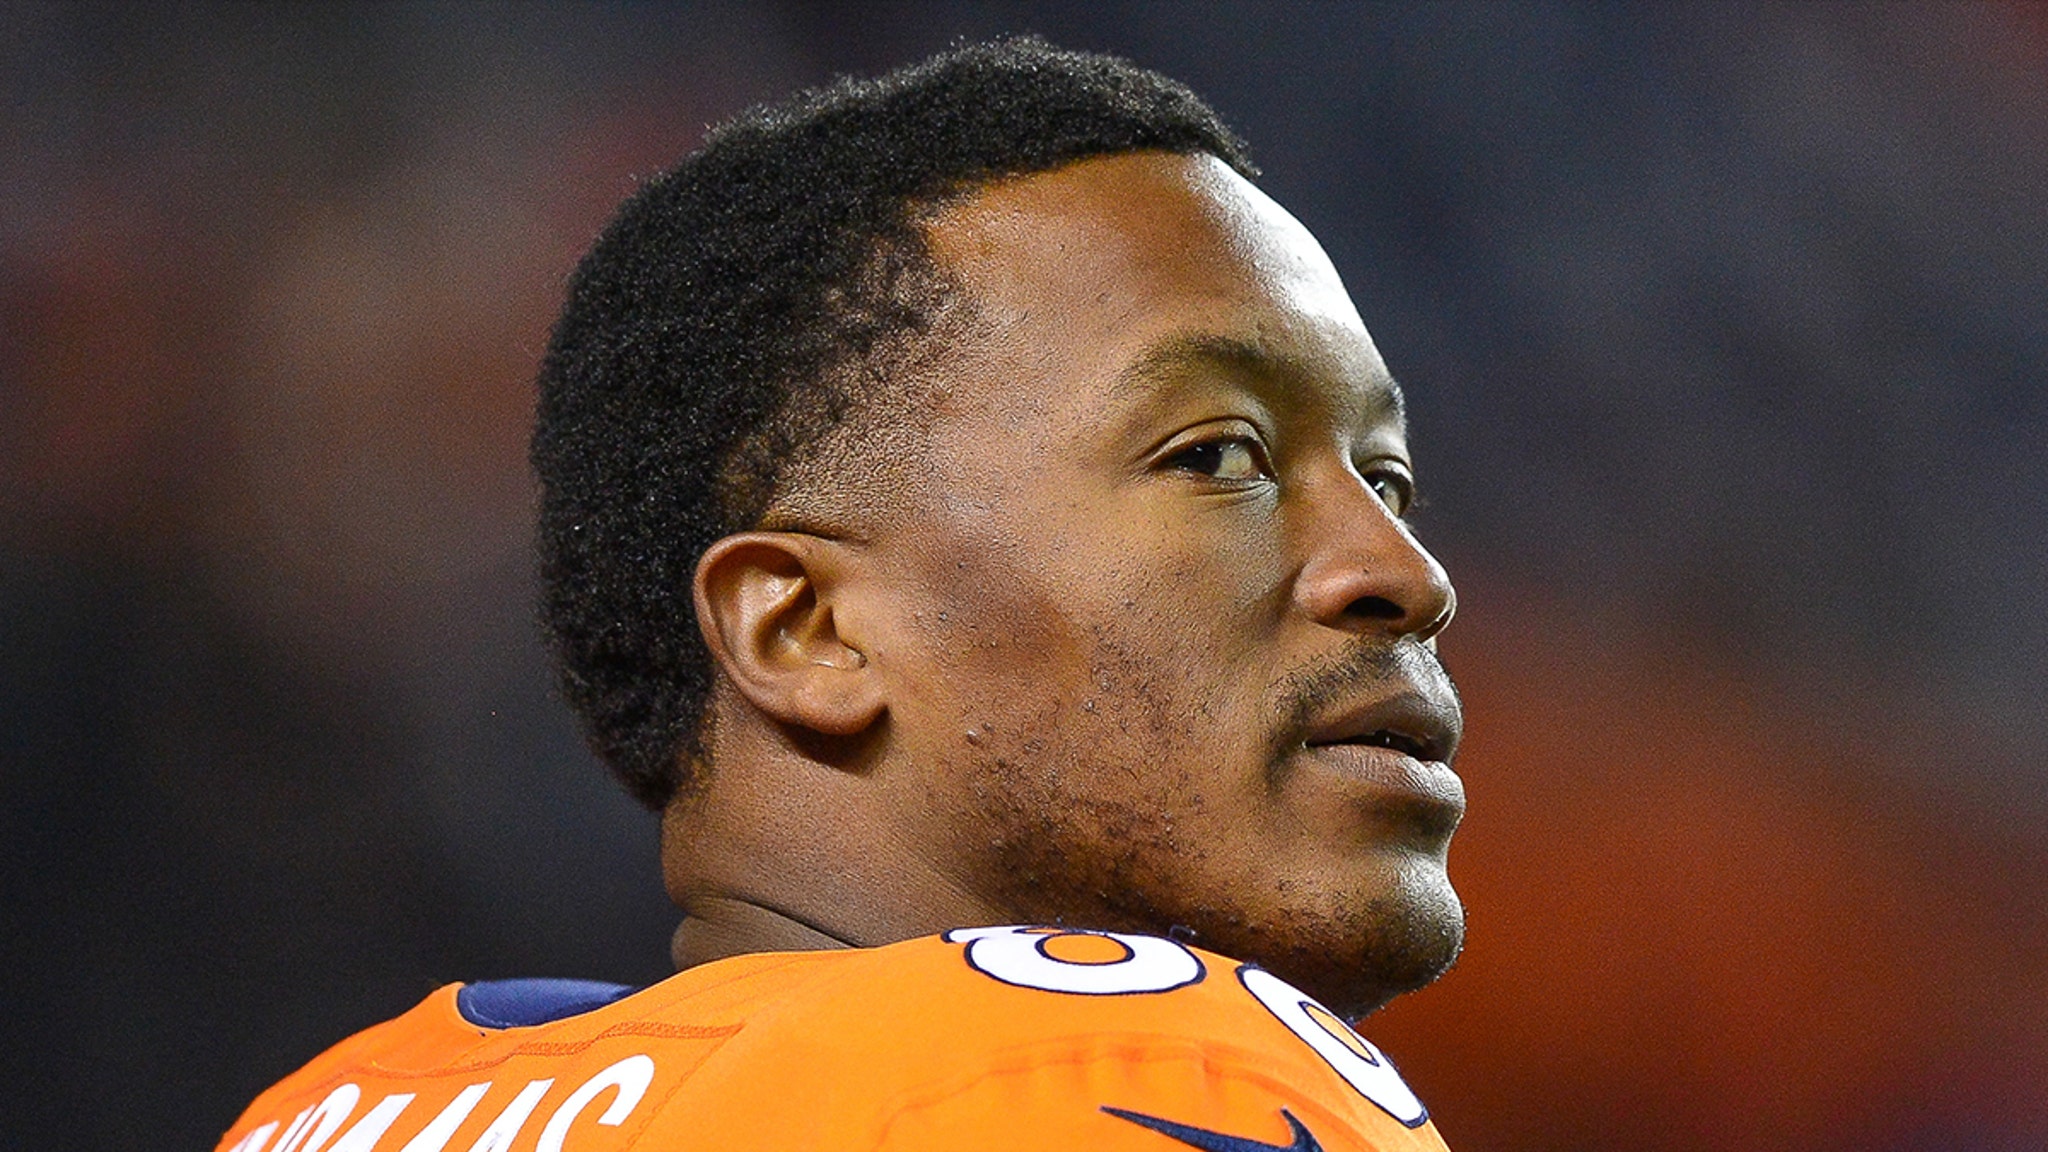 Demaryius Thomas Found Dead In Shower After 911 Call For 'Cardiac Arrest'